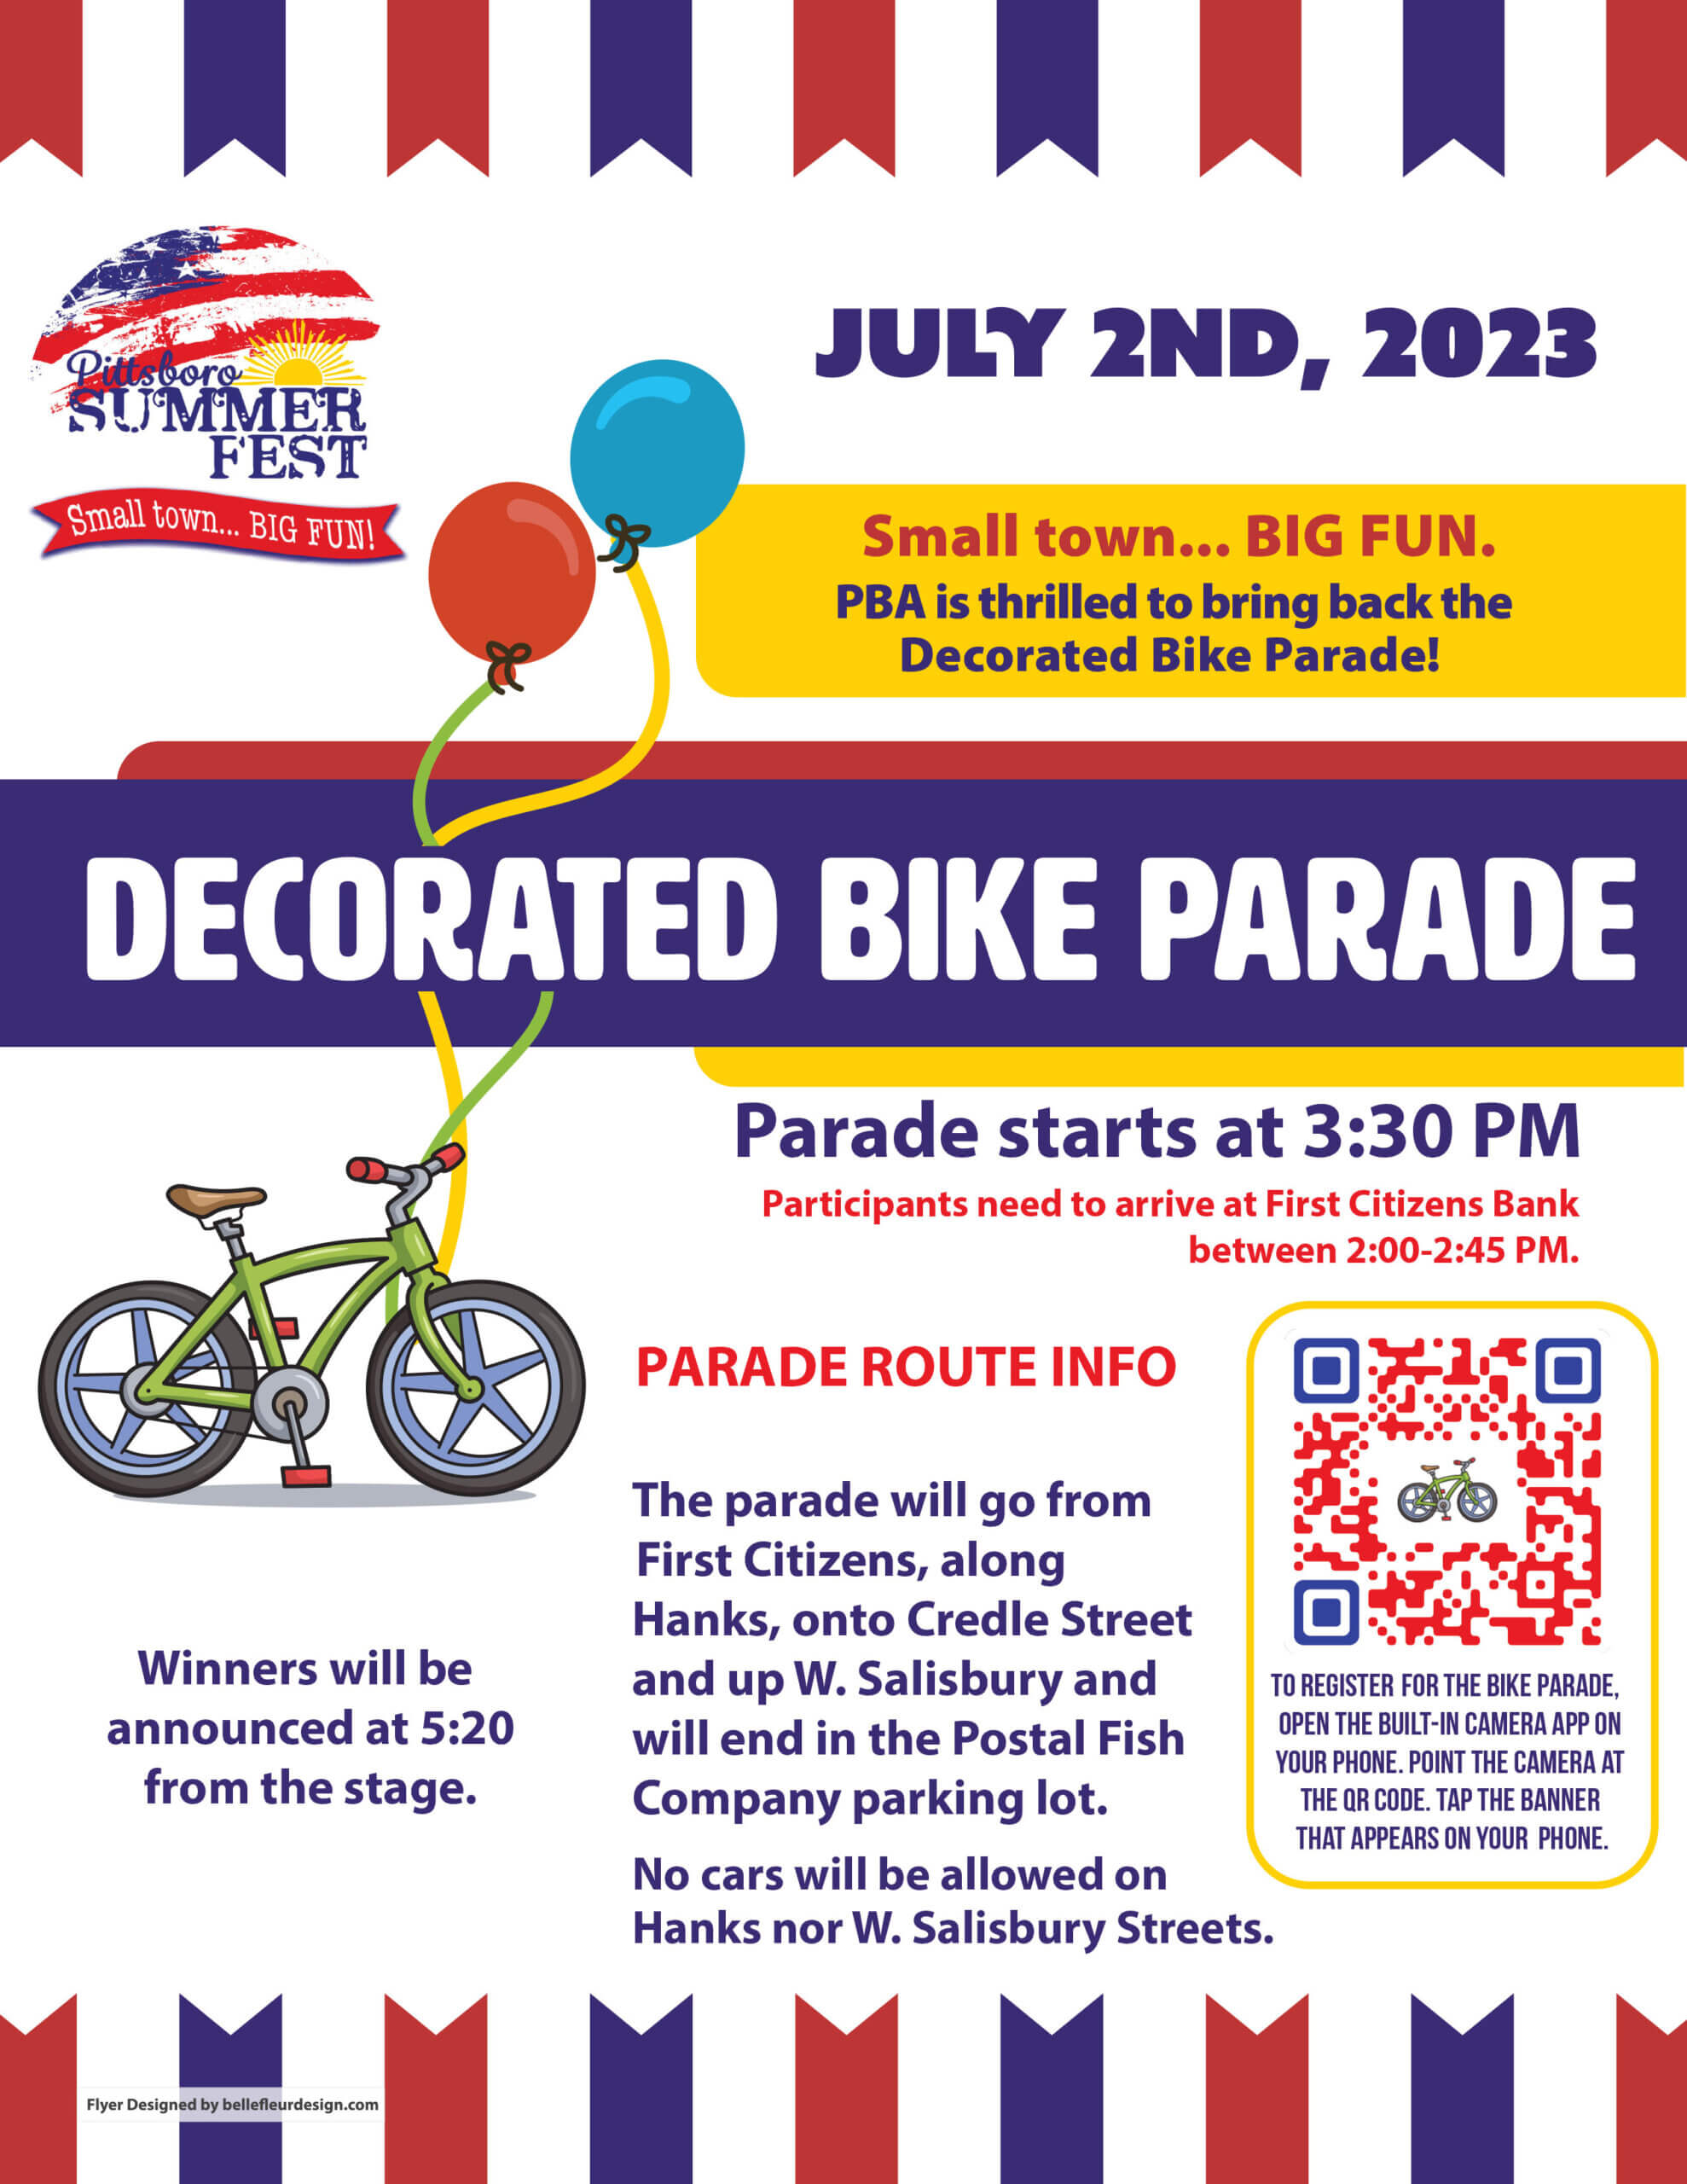 Summer Fest Decorated Bicycle Parade flyer